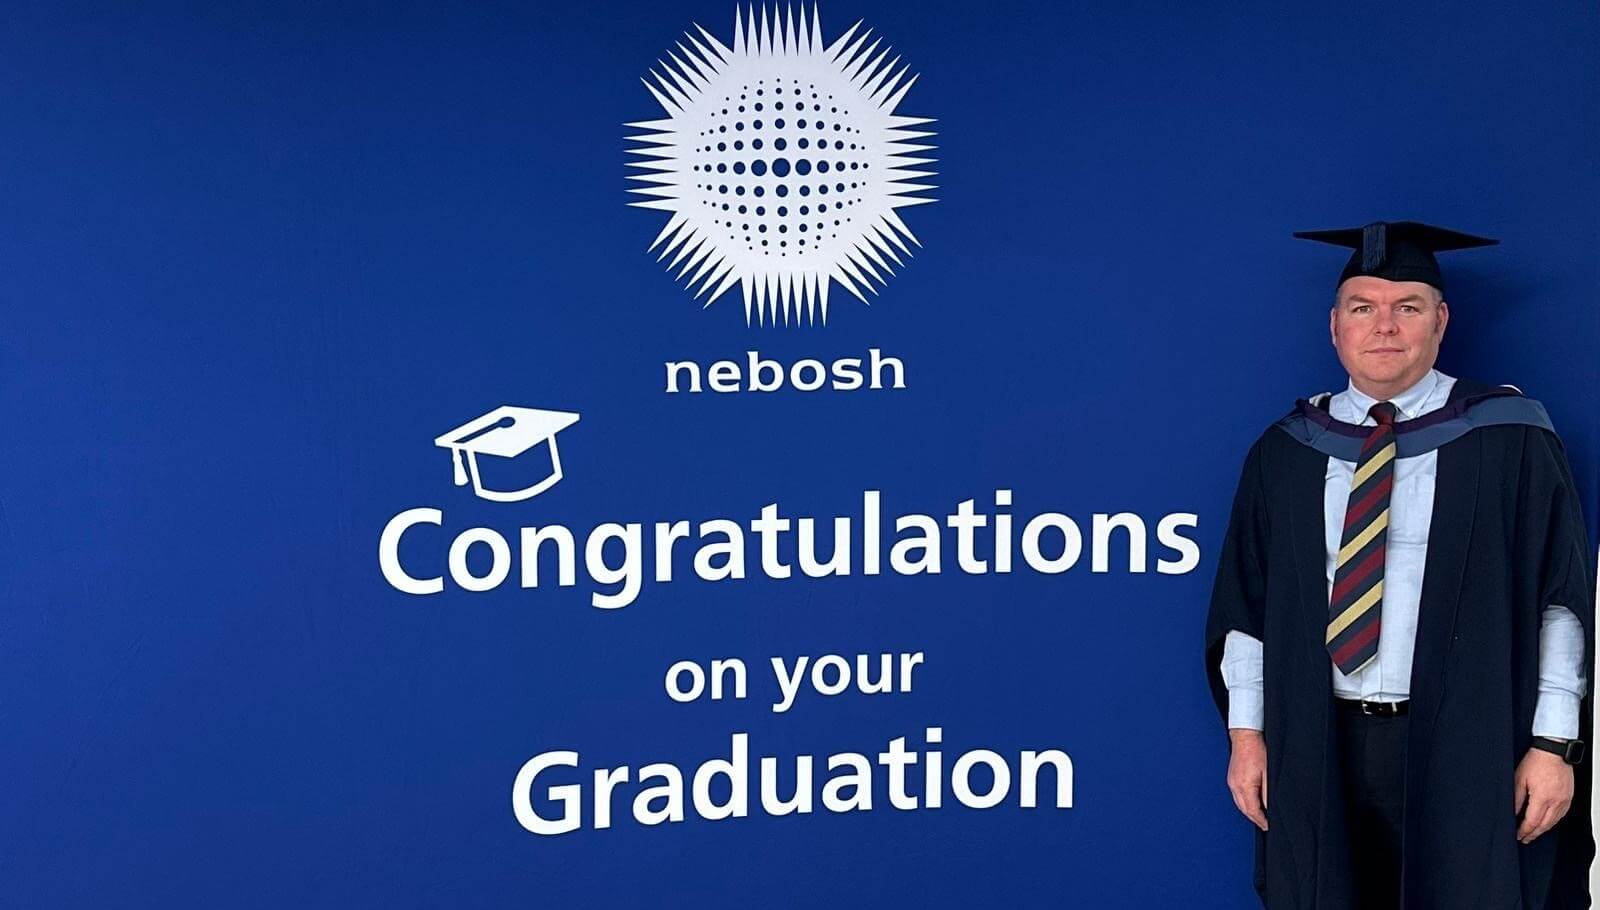 A photo of ACT graduate Martyn Hill wearing a graduation cap and gown, next to a large backdrop that reads 'NEBOSH -Congratulations on your Graduation' 